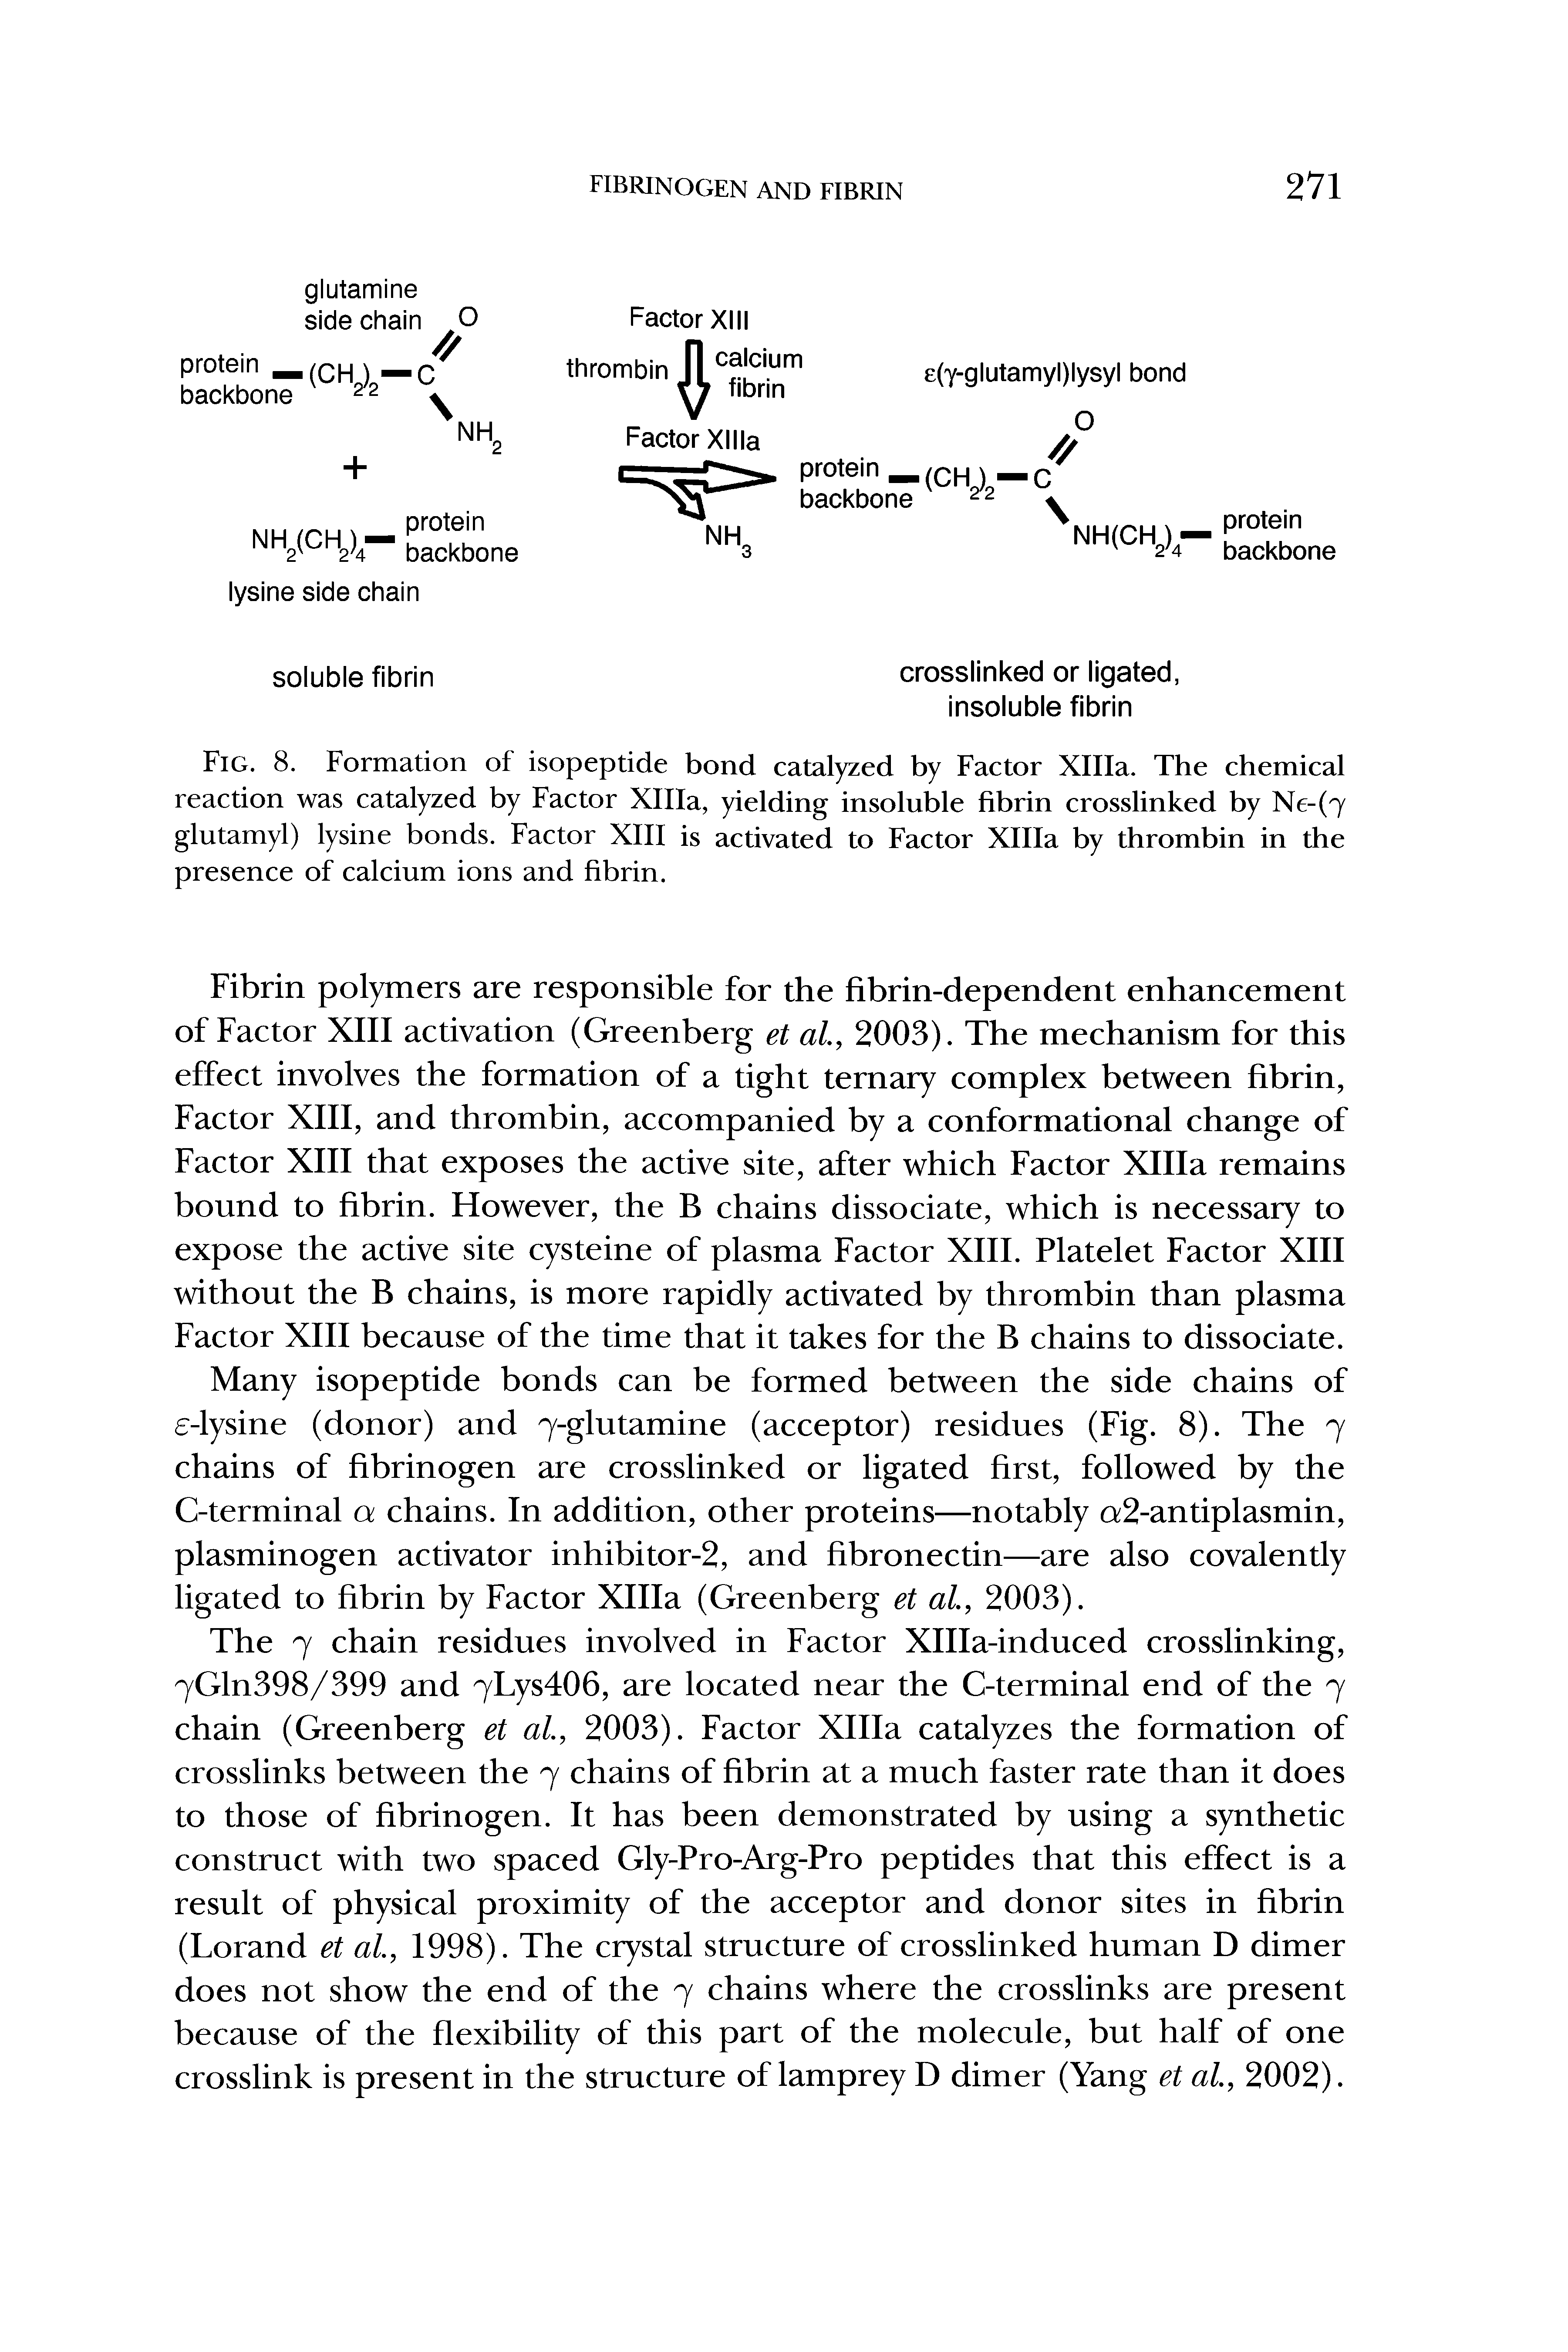 Fig. 8. Formation of isopeptide bond catalyzed by Factor XHIa. The chemical reaction was catalyzed by Factor XHIa, yielding insoluble fibrin crosslinked by Ne-(7 glutamyl) lysine bonds. Factor XIII is activated to Factor XHIa by thrombin in the presence of calcium ions and fibrin.